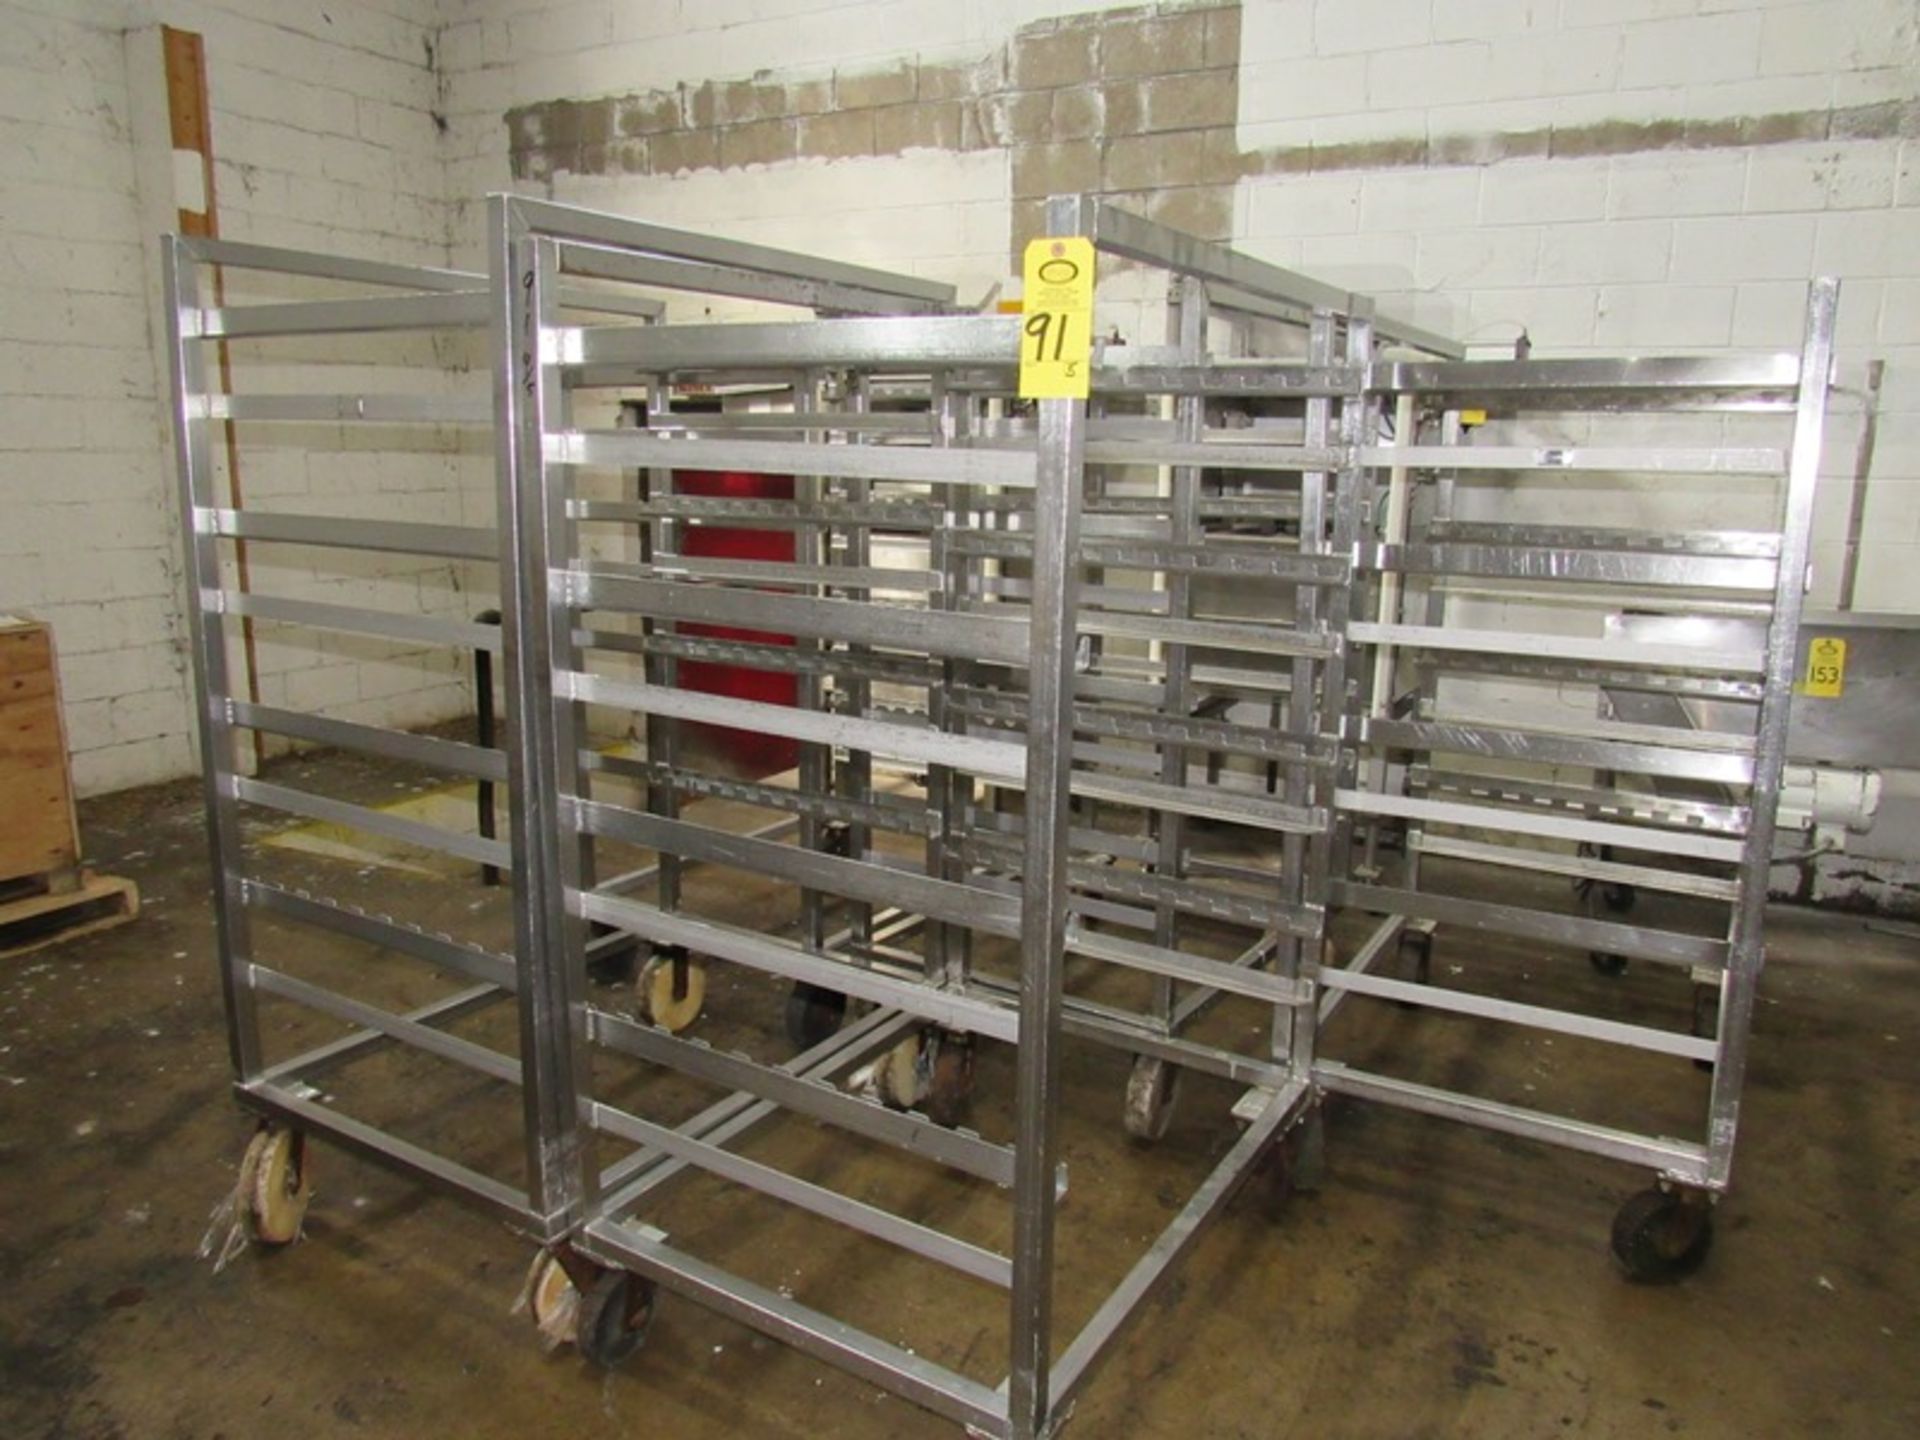 Stainless Steel Smoke Trucks, 32" W X 46 1/2" L X 69" T, 8 spaces for sticks or screens, 6" apart,